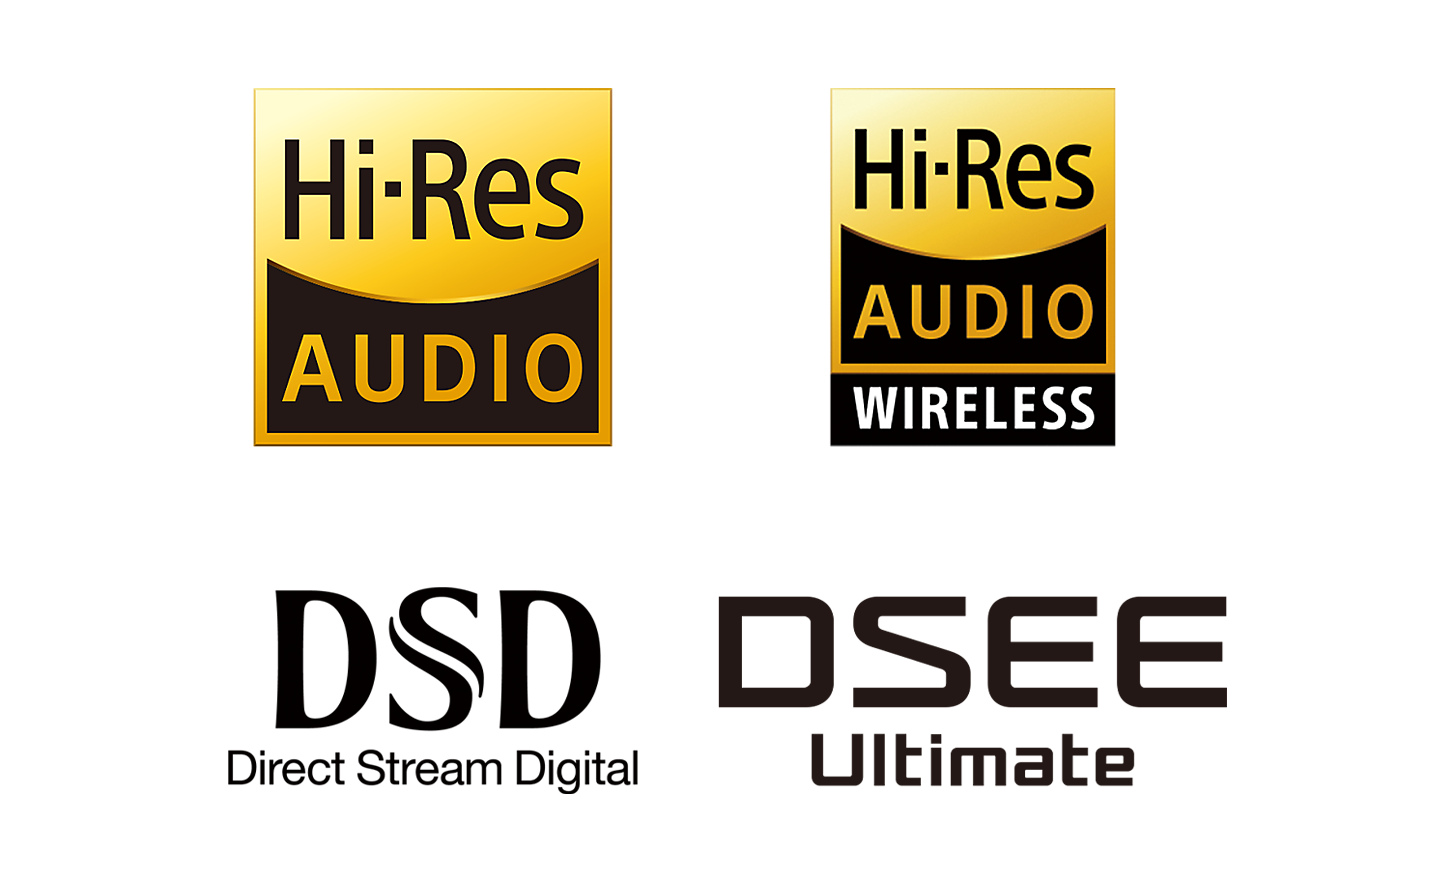 High-Res Audio、High-Res Audio WIRELESS、DSD 及 DSEE 的標誌。